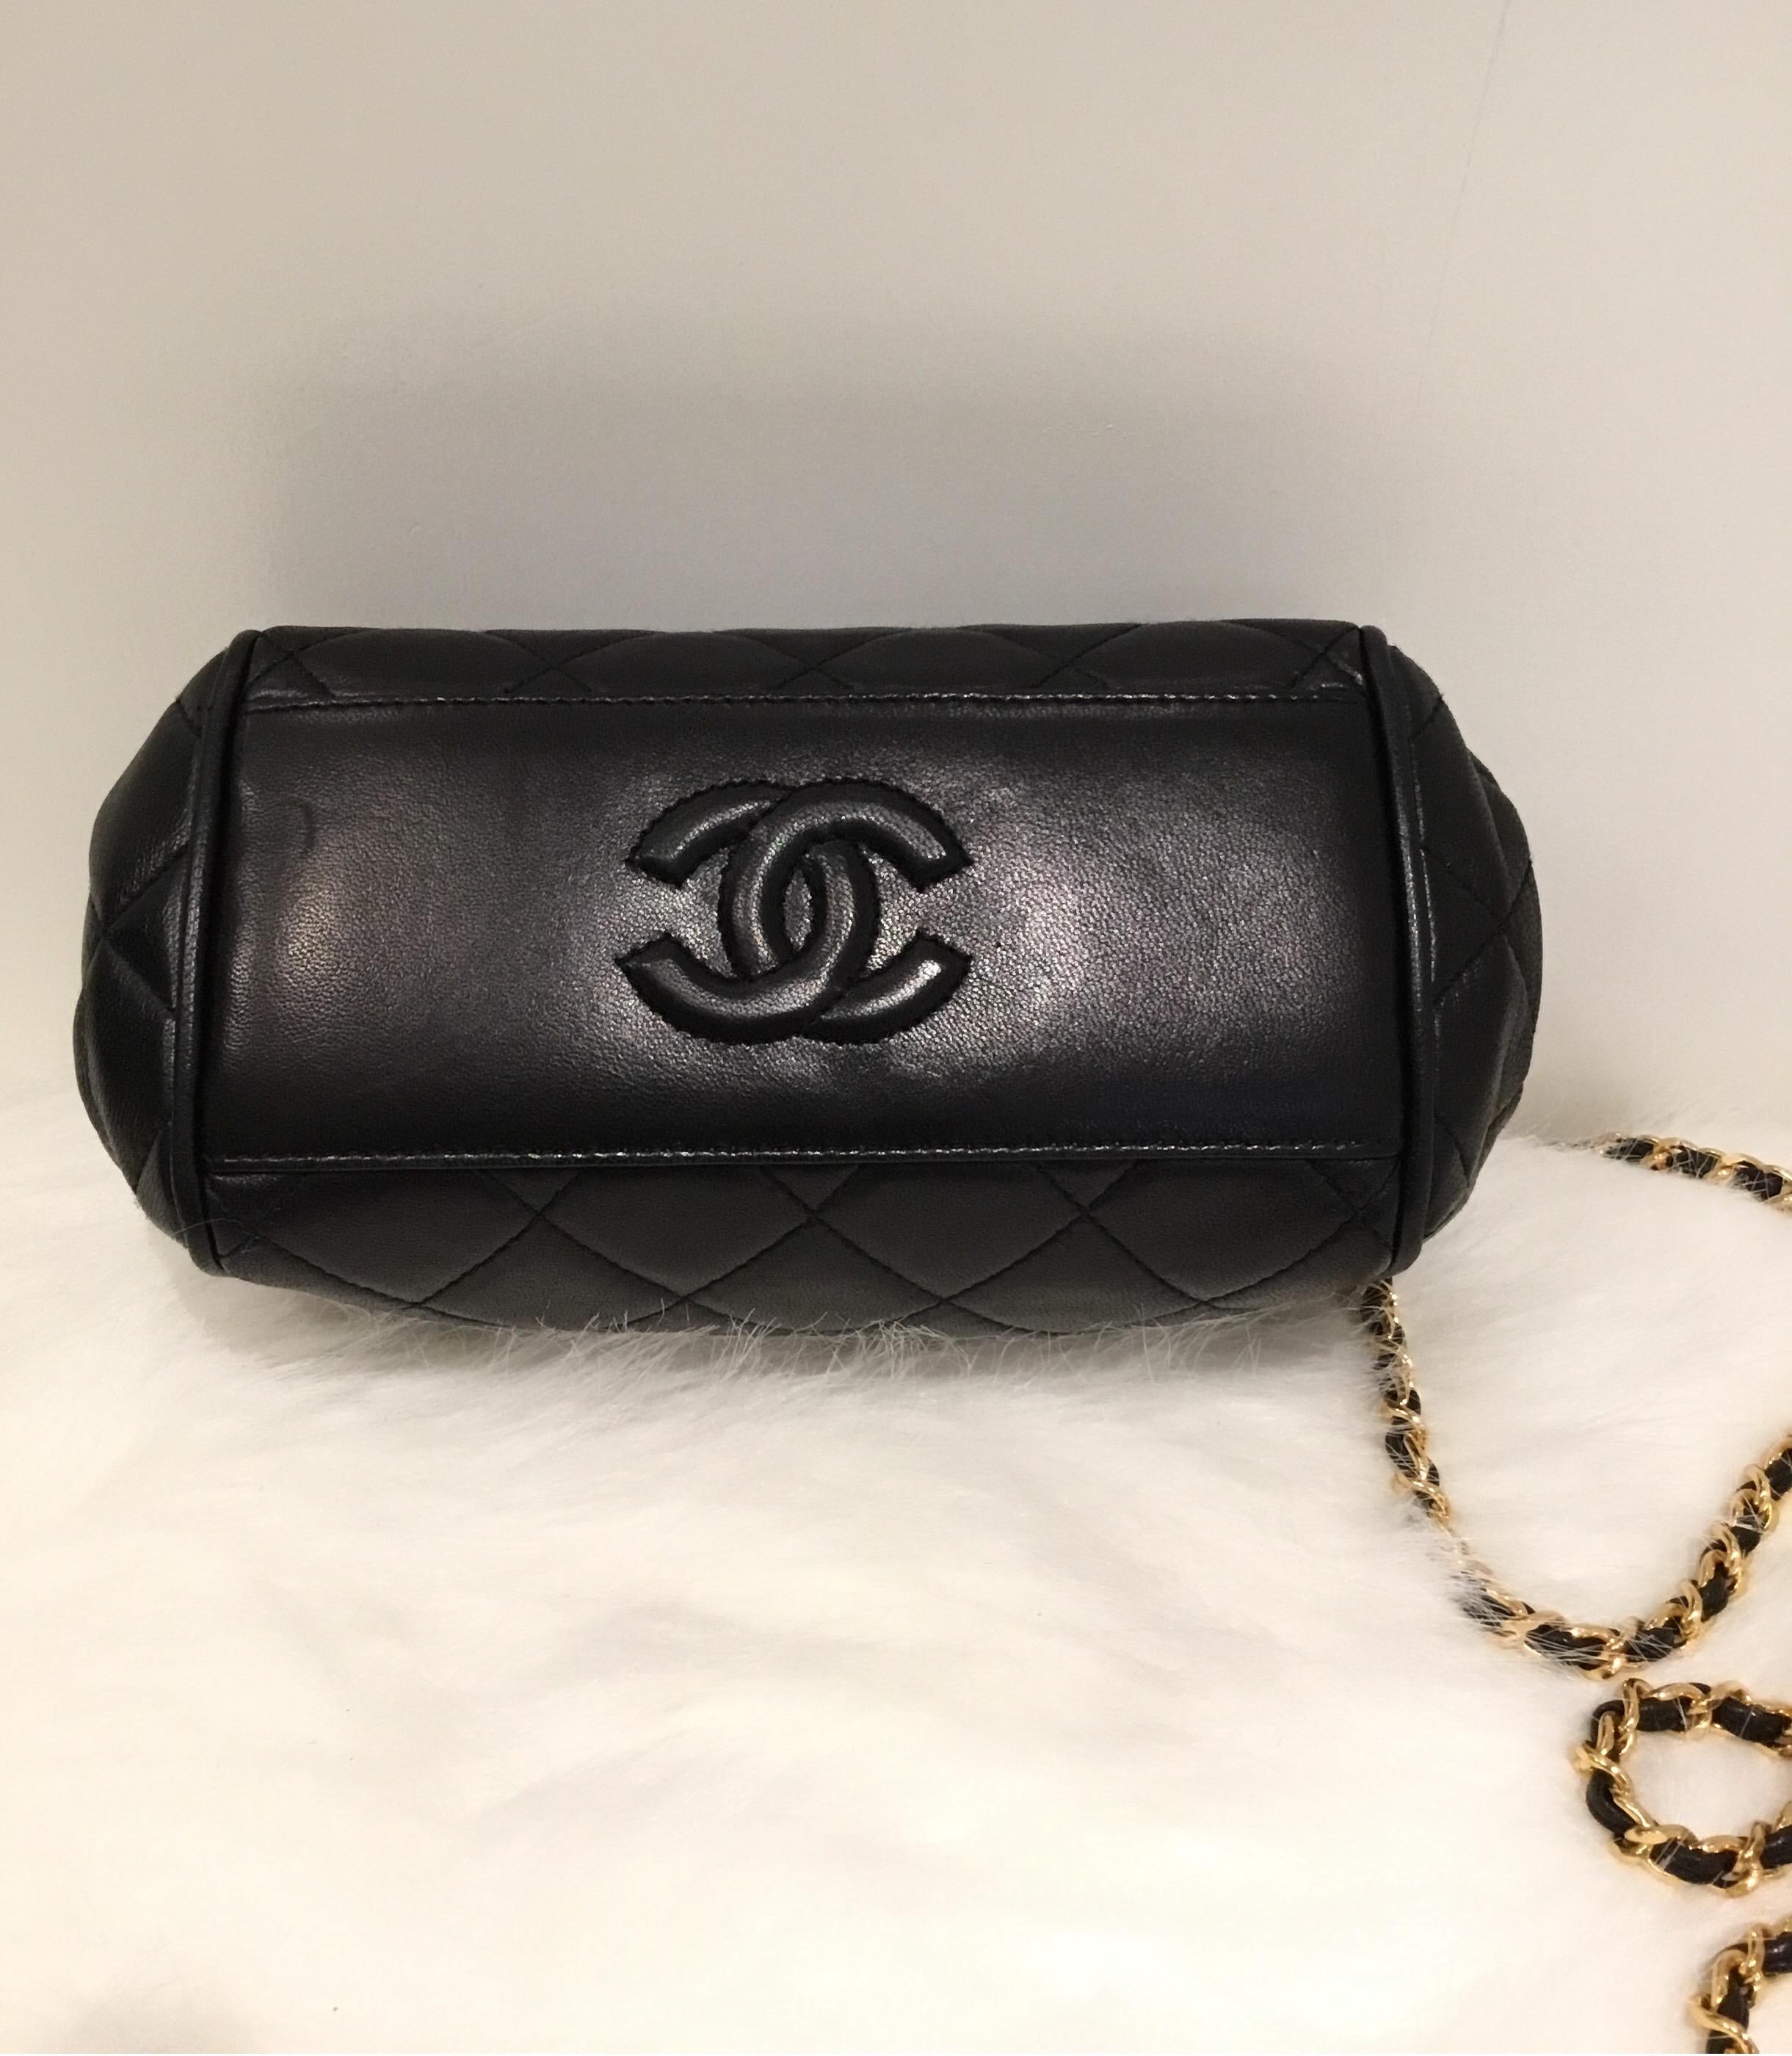 chanel black bag with gold chain